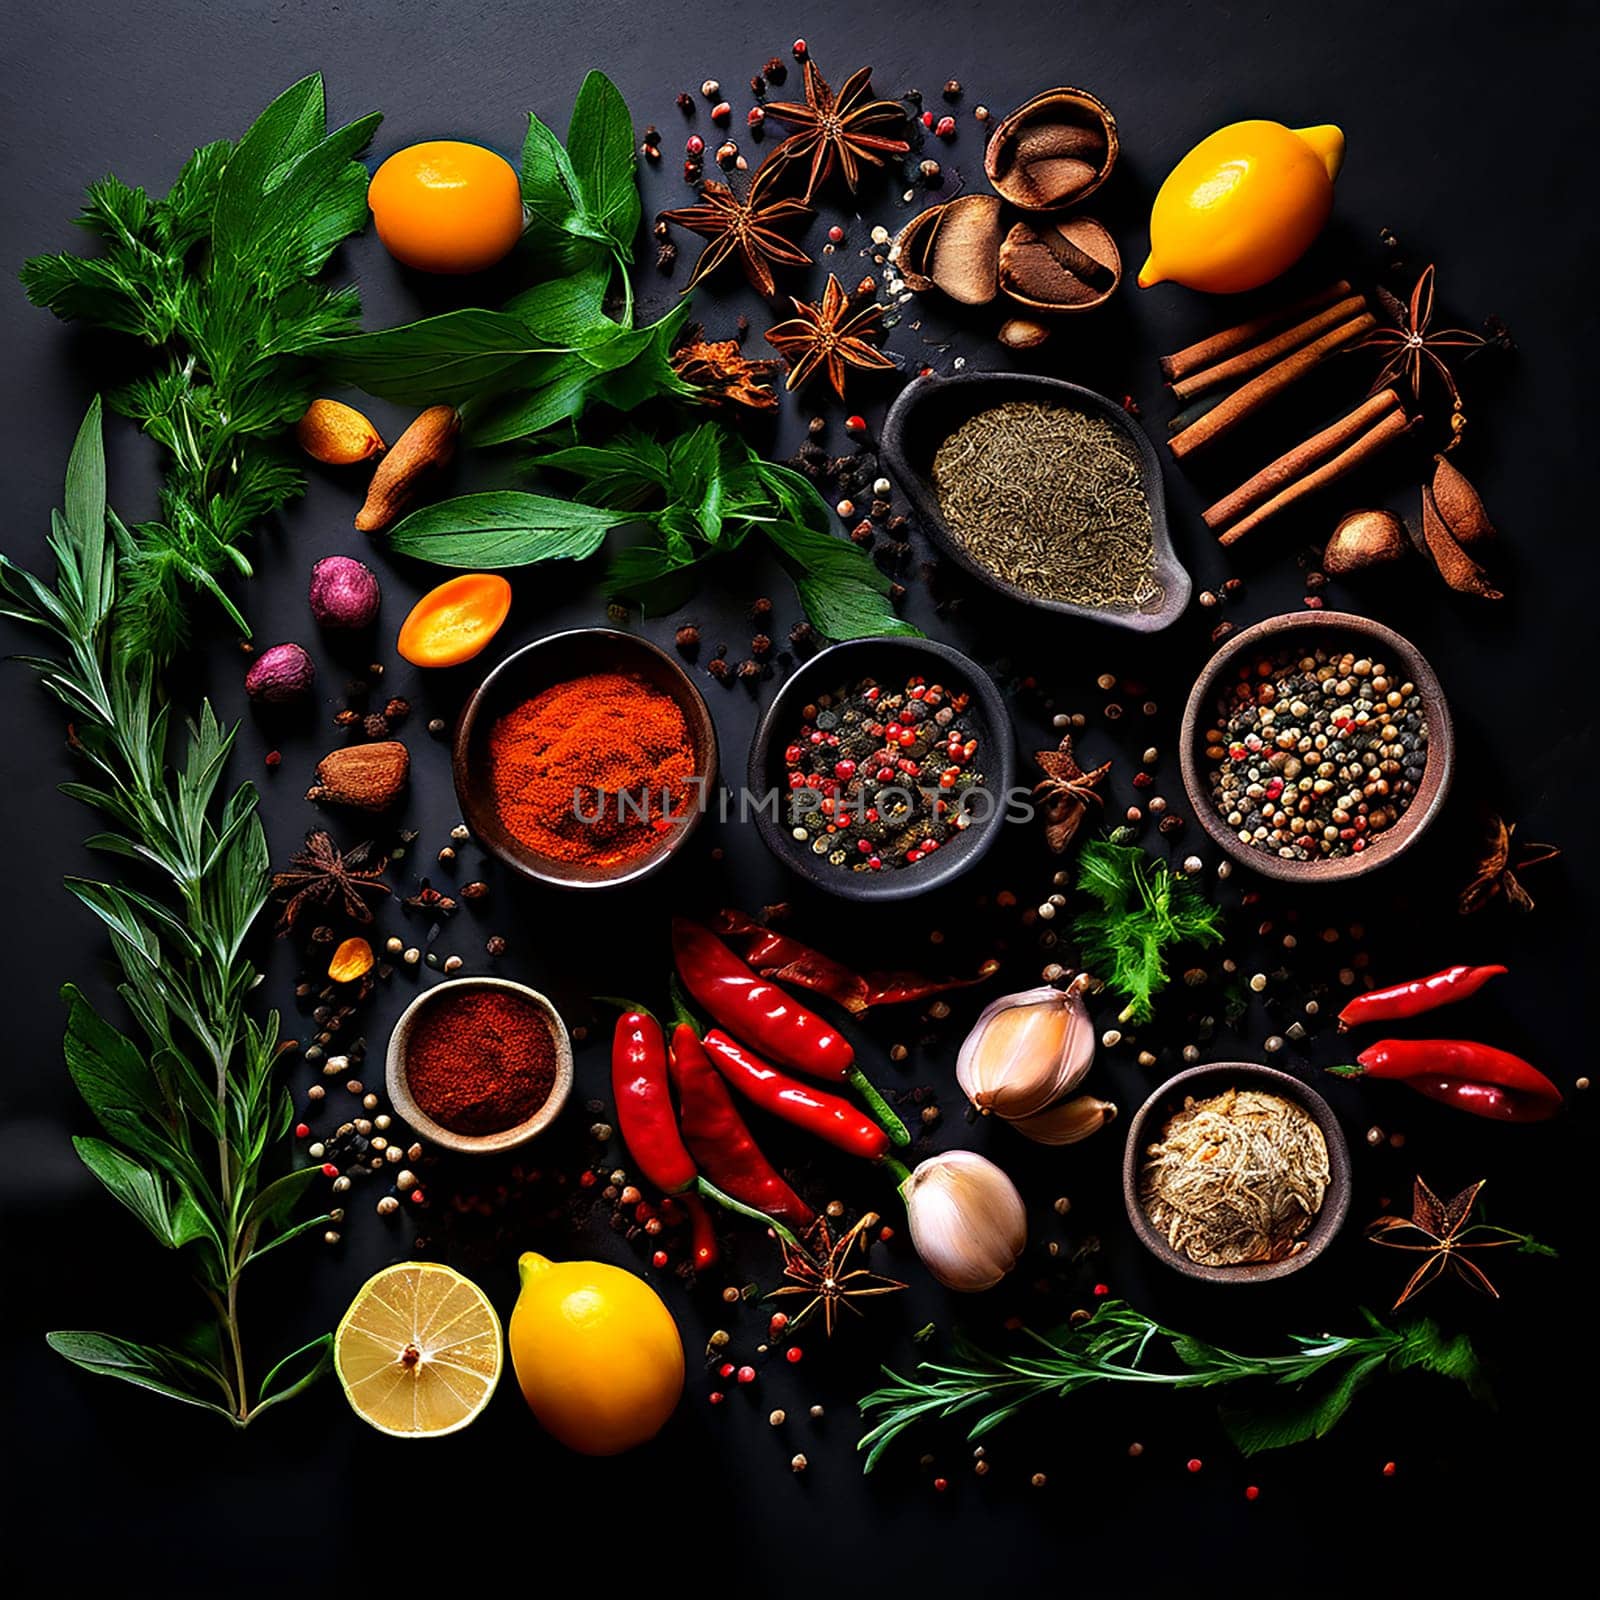 Culinary Mosaic: Diverse Herbs and Spices on Dark Background by Petrichor